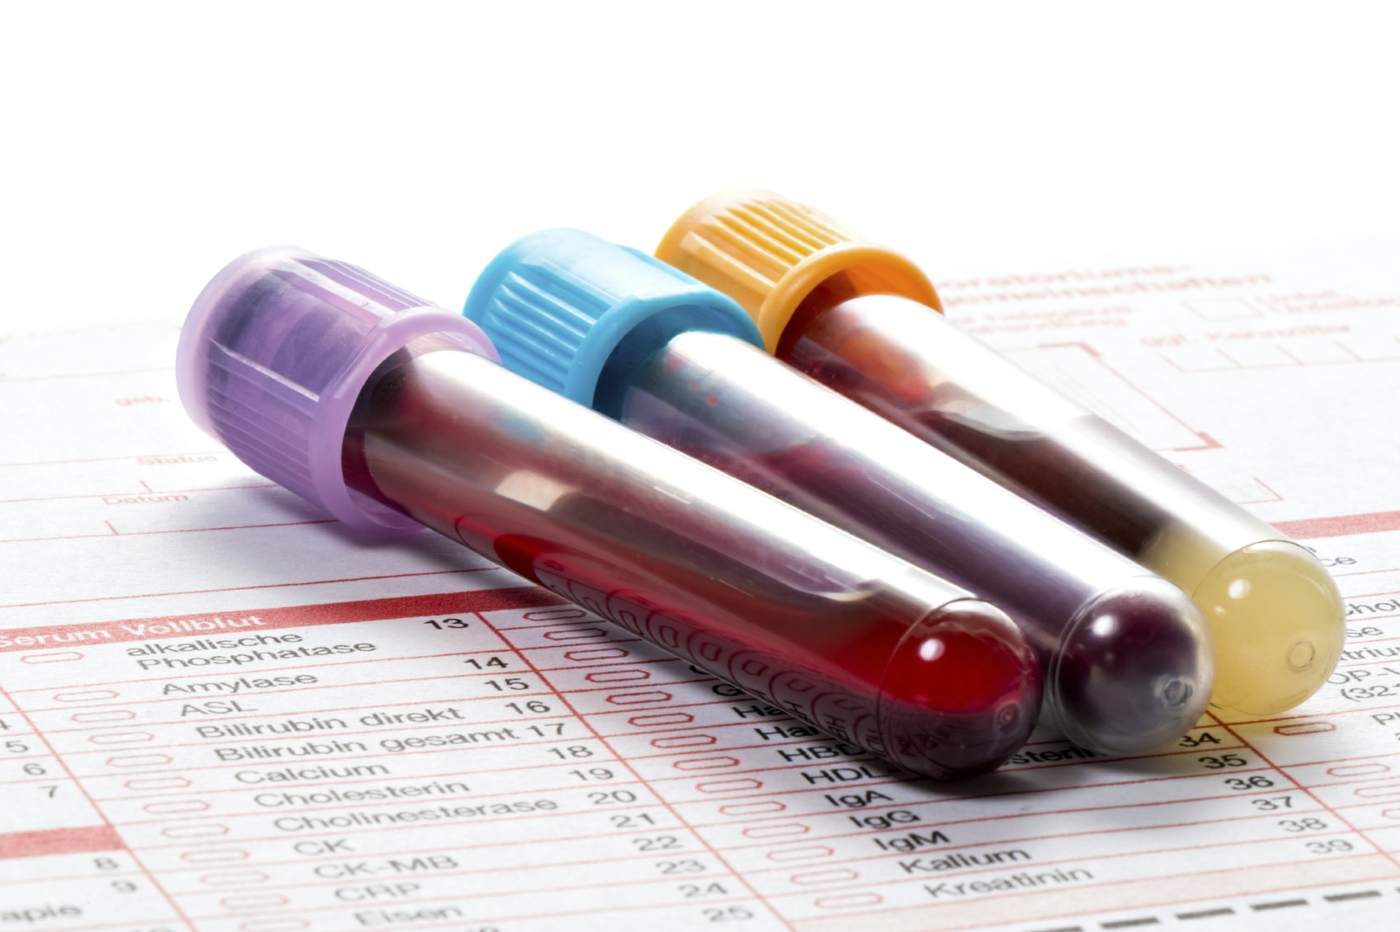 Blood values ​​in the blood picture are used to diagnose various diseases